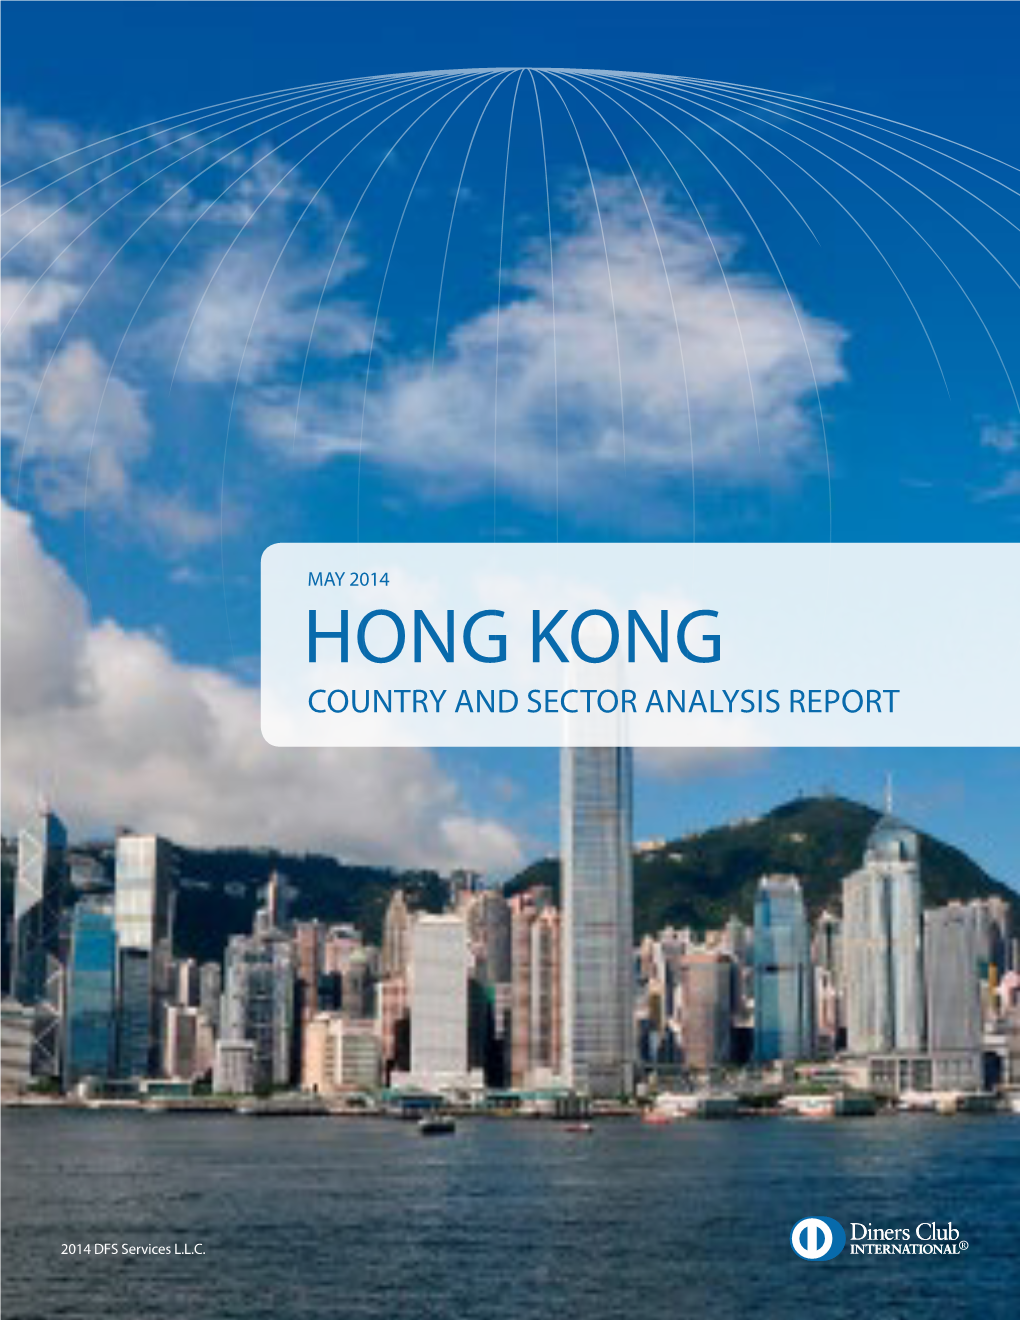 Hong Kong Country and Sector Analysis Report